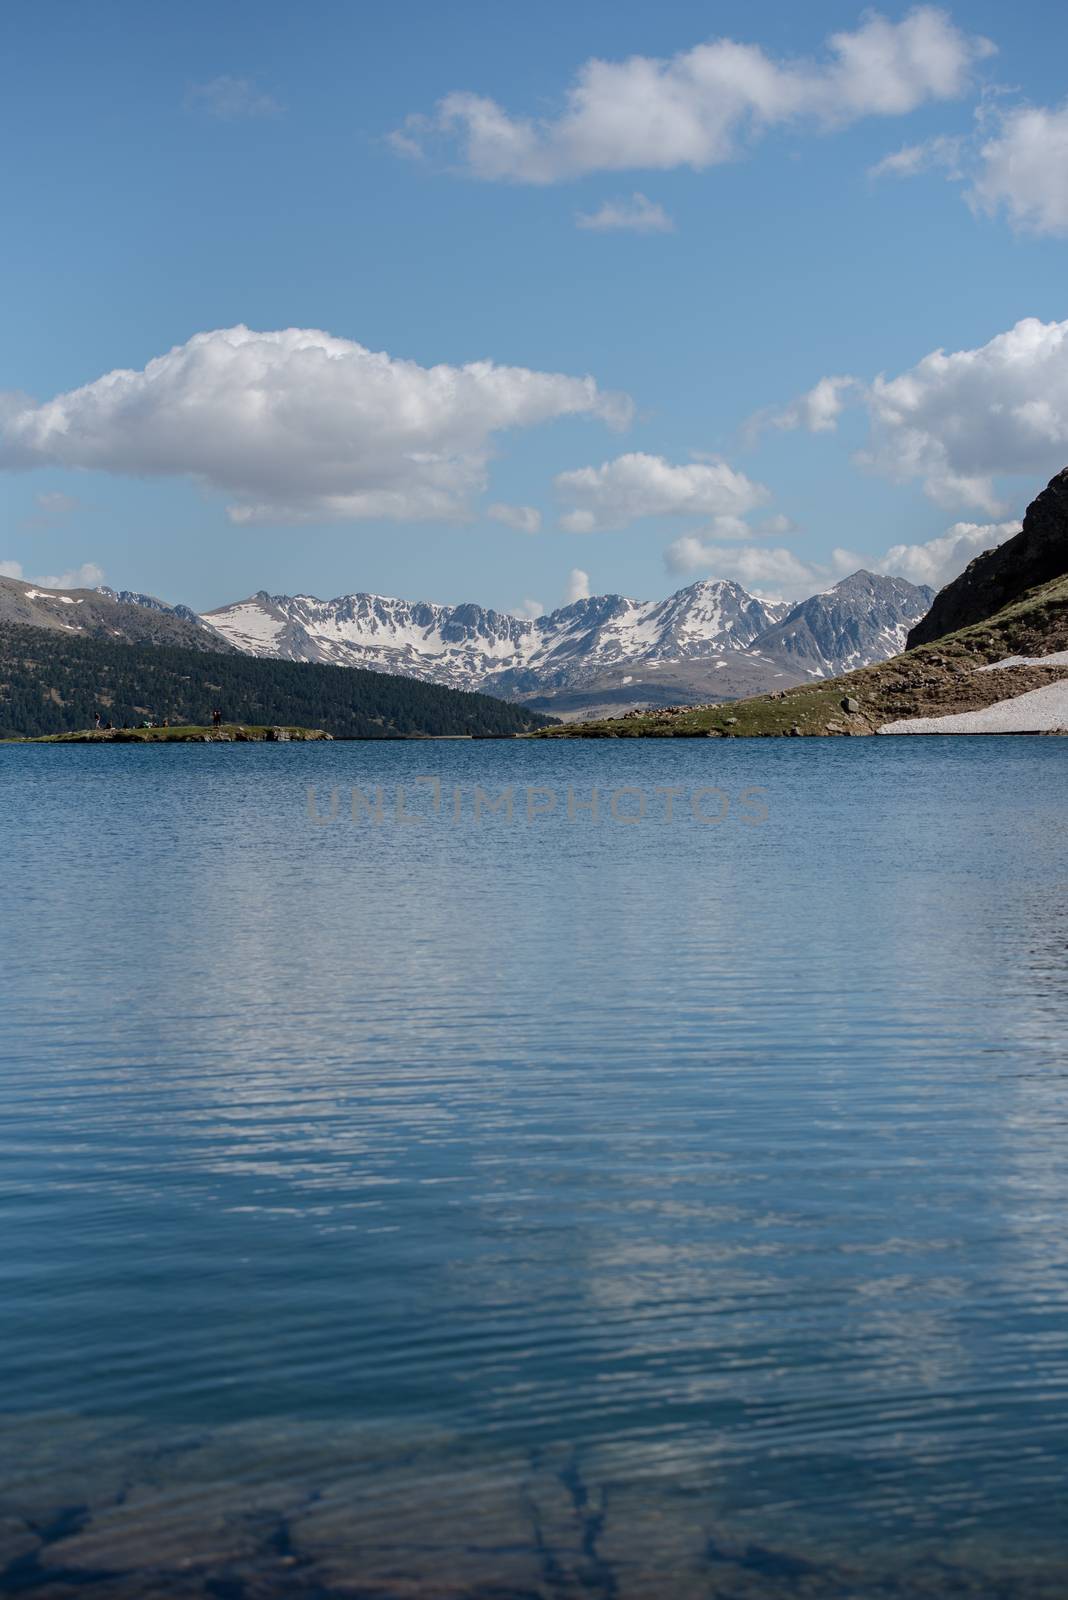 Beautiful Querol Lake in the mountain refuge in the Incles Valley, Canillo, Andorra.